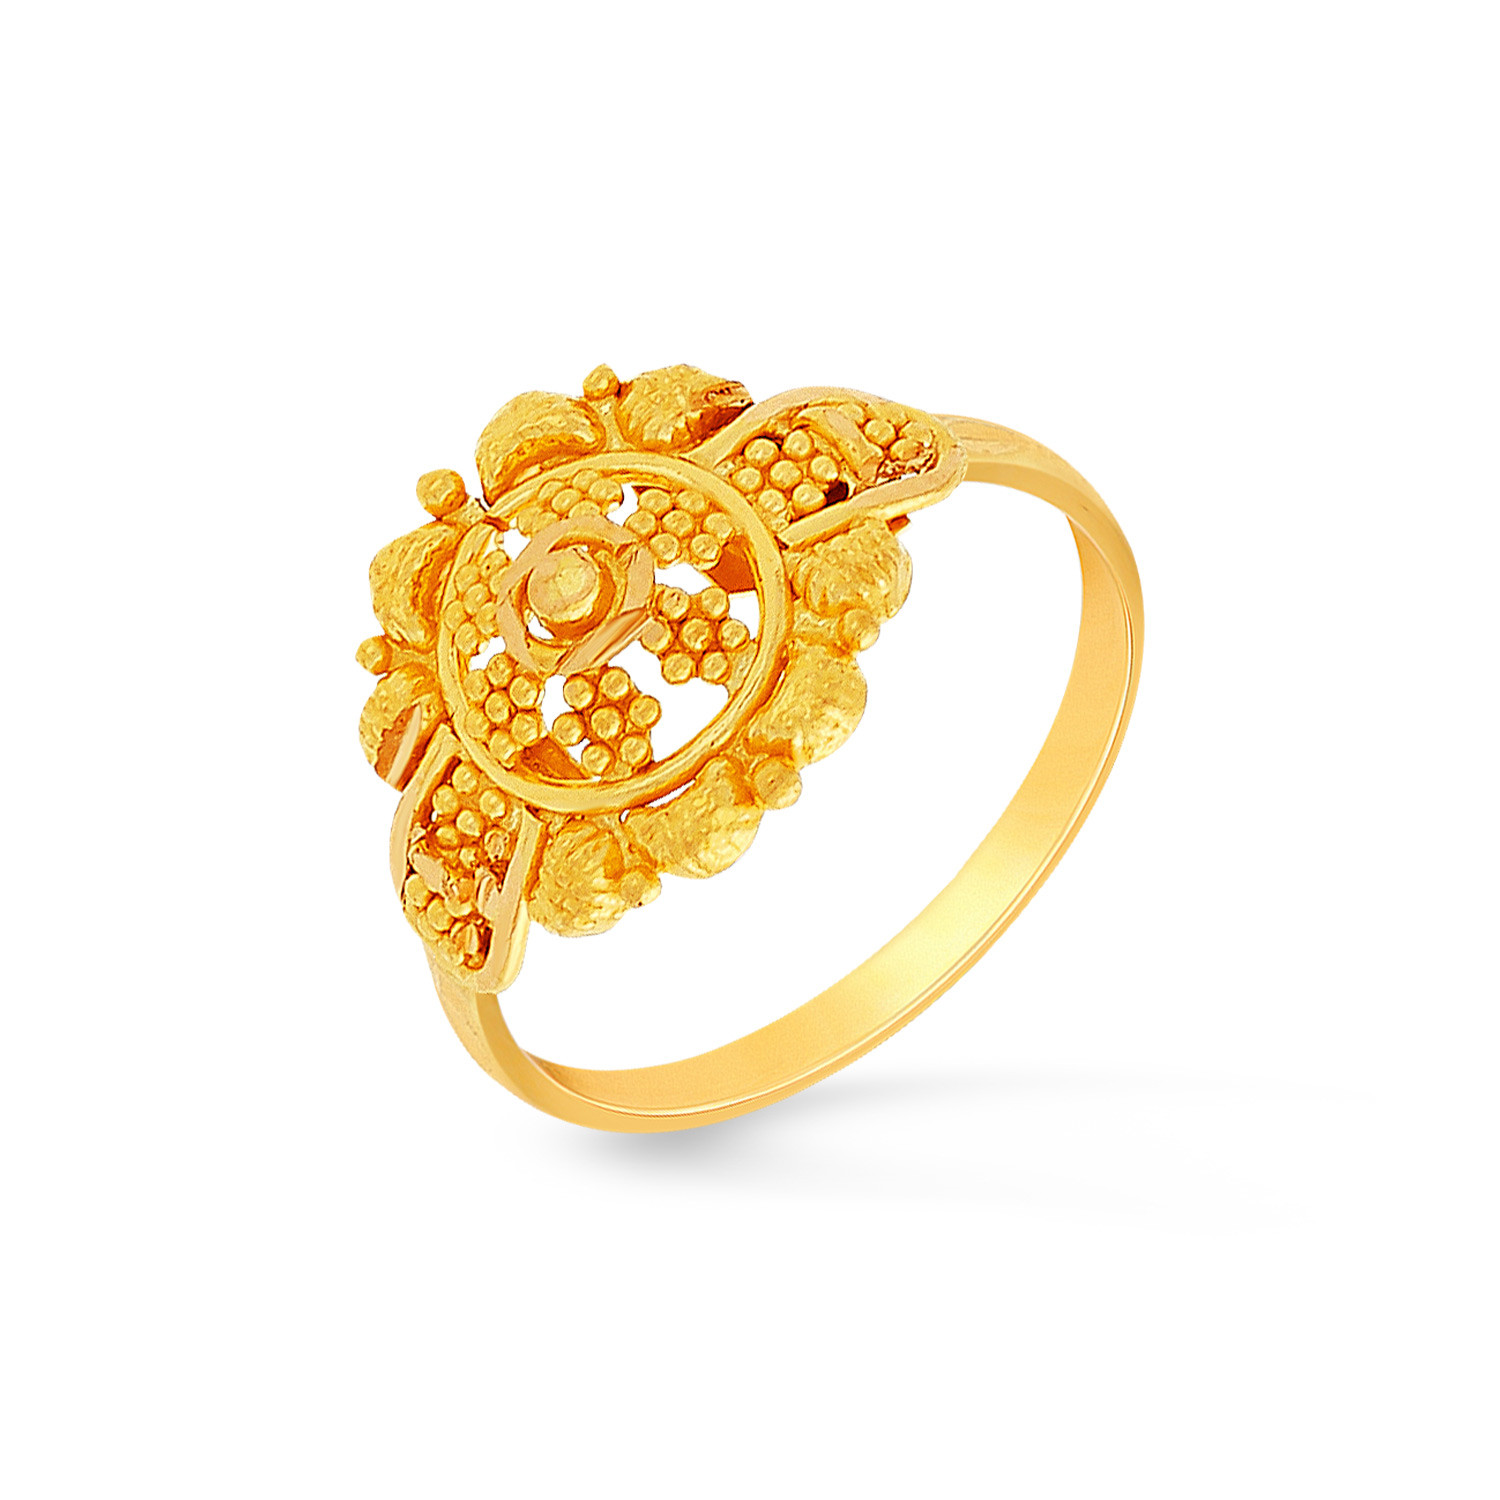 Buy Malabar Gold 22 KT Gold Band Ring for Women Online